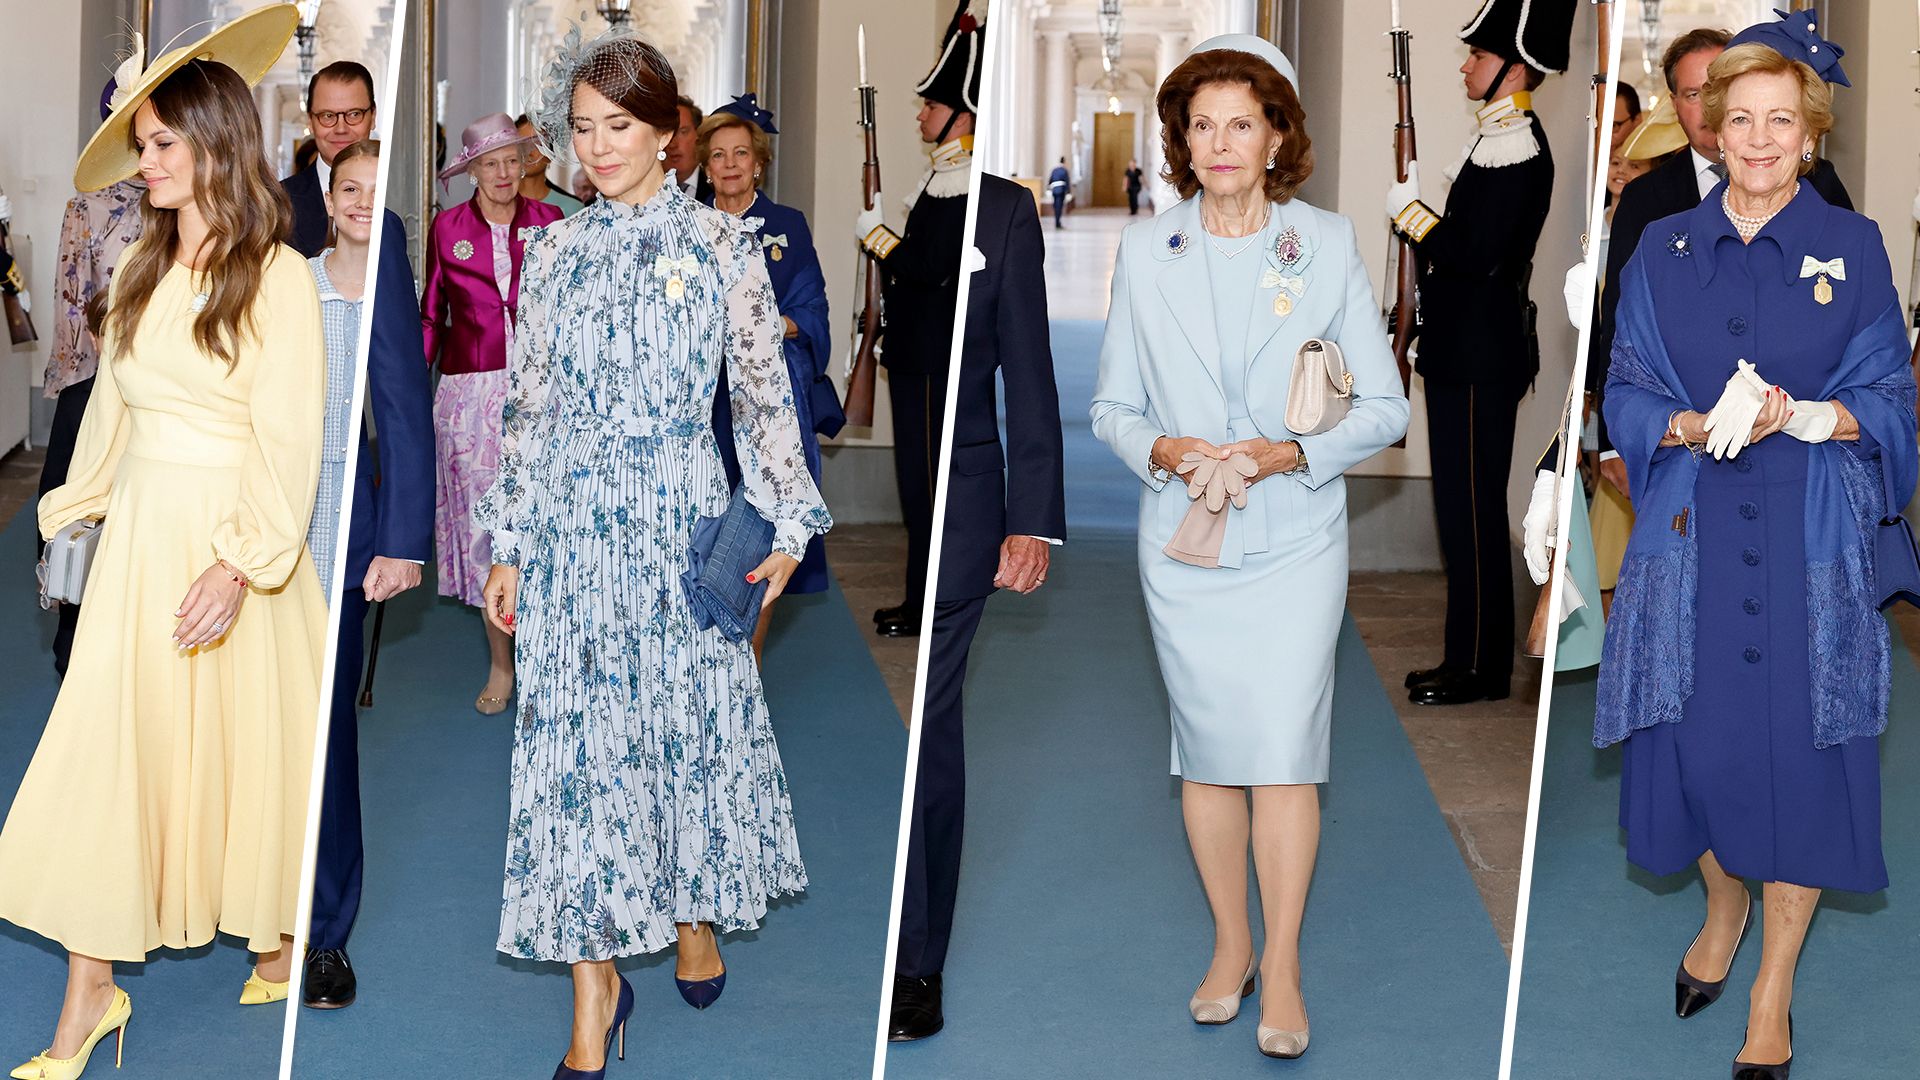 The royals at King Carl Gustaf's Golden Jubilee 

